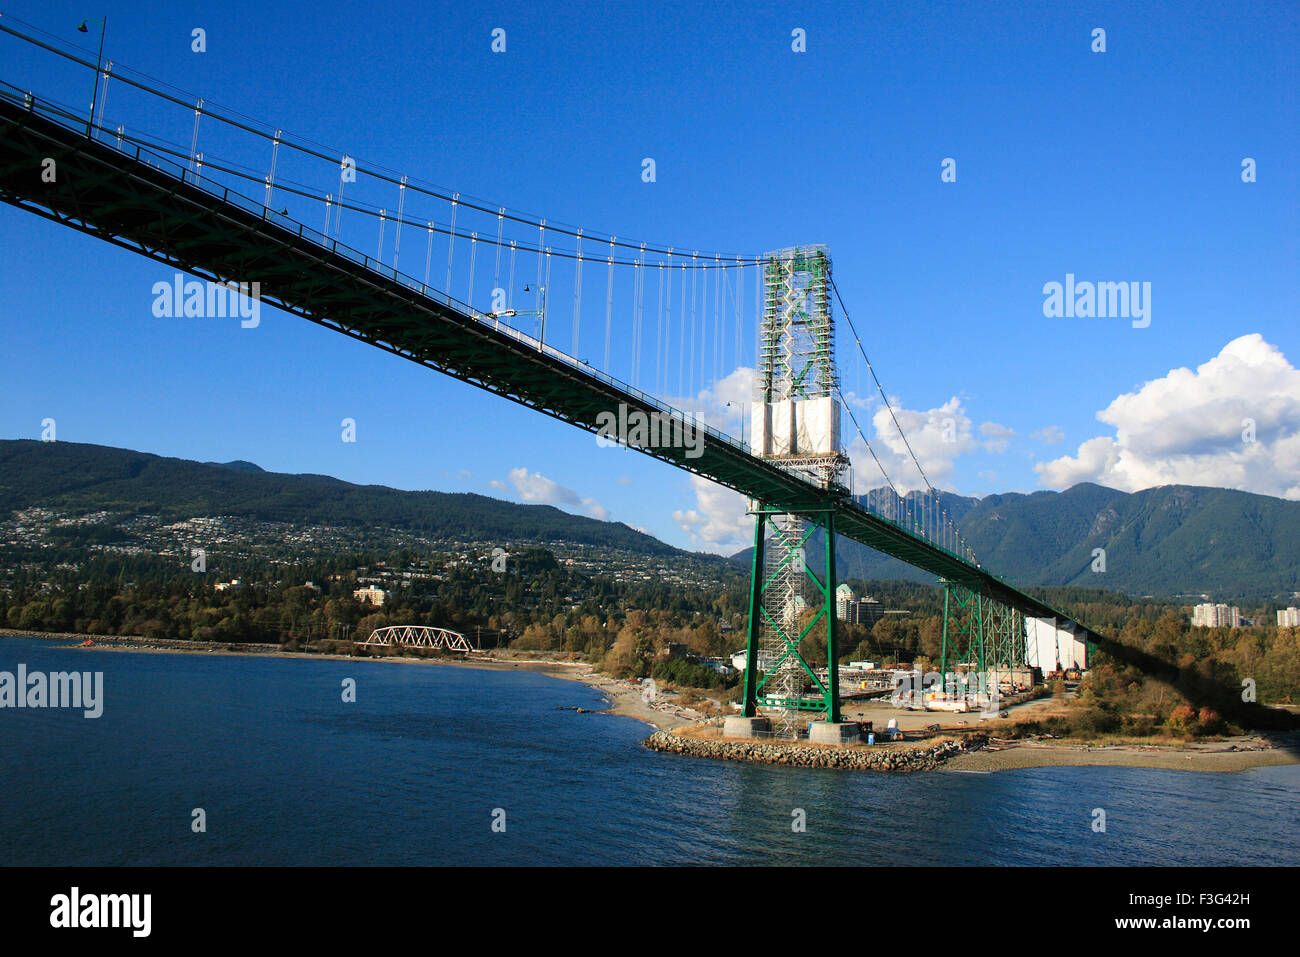 Lions gate bridge constructed in late 1930 national historic site over river ; Canada Stock Photo